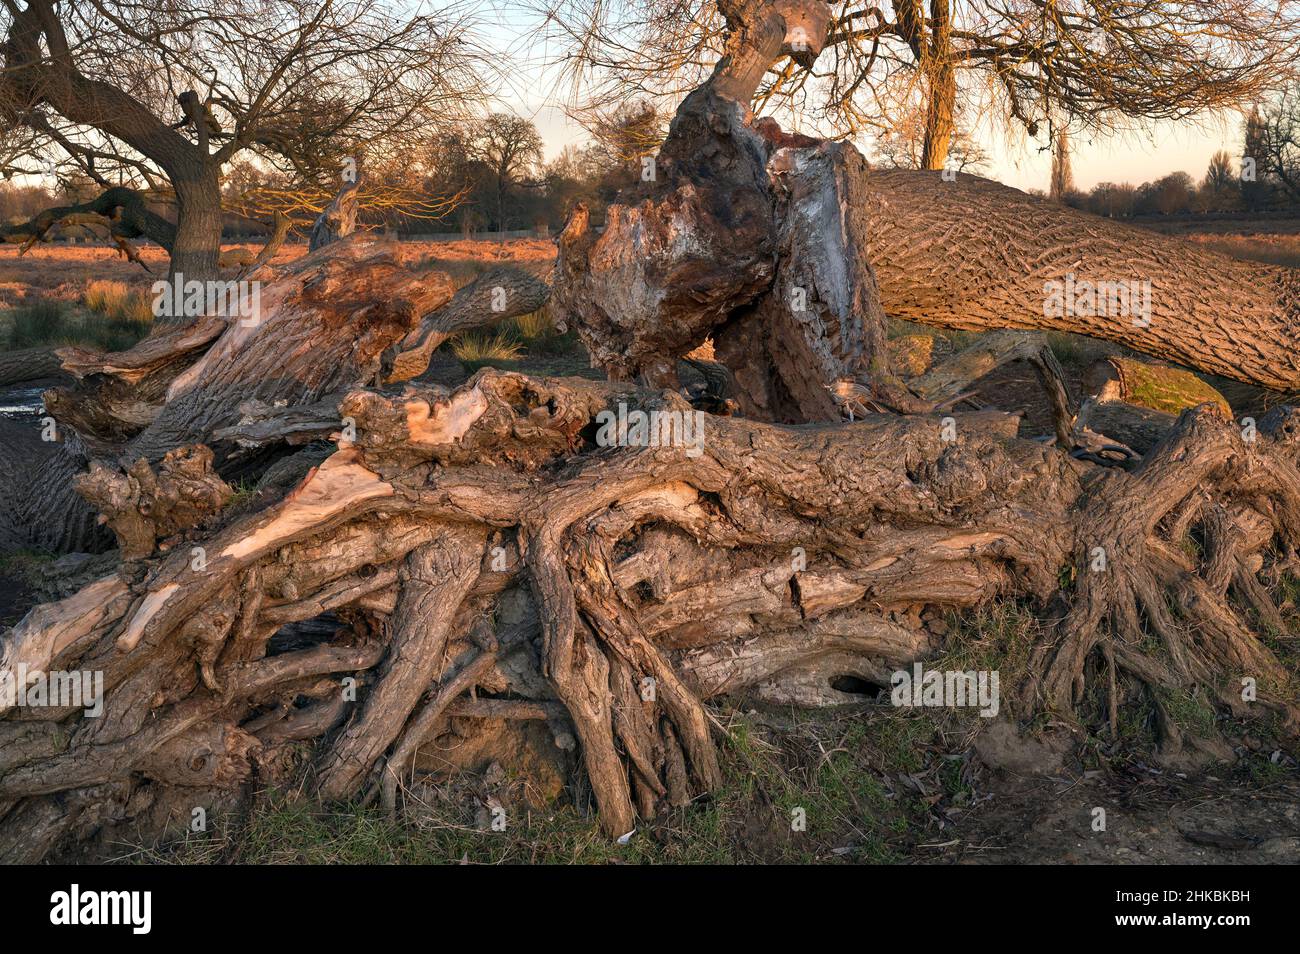 Mangled tree roots of old fallen tree left to decay Stock Photo